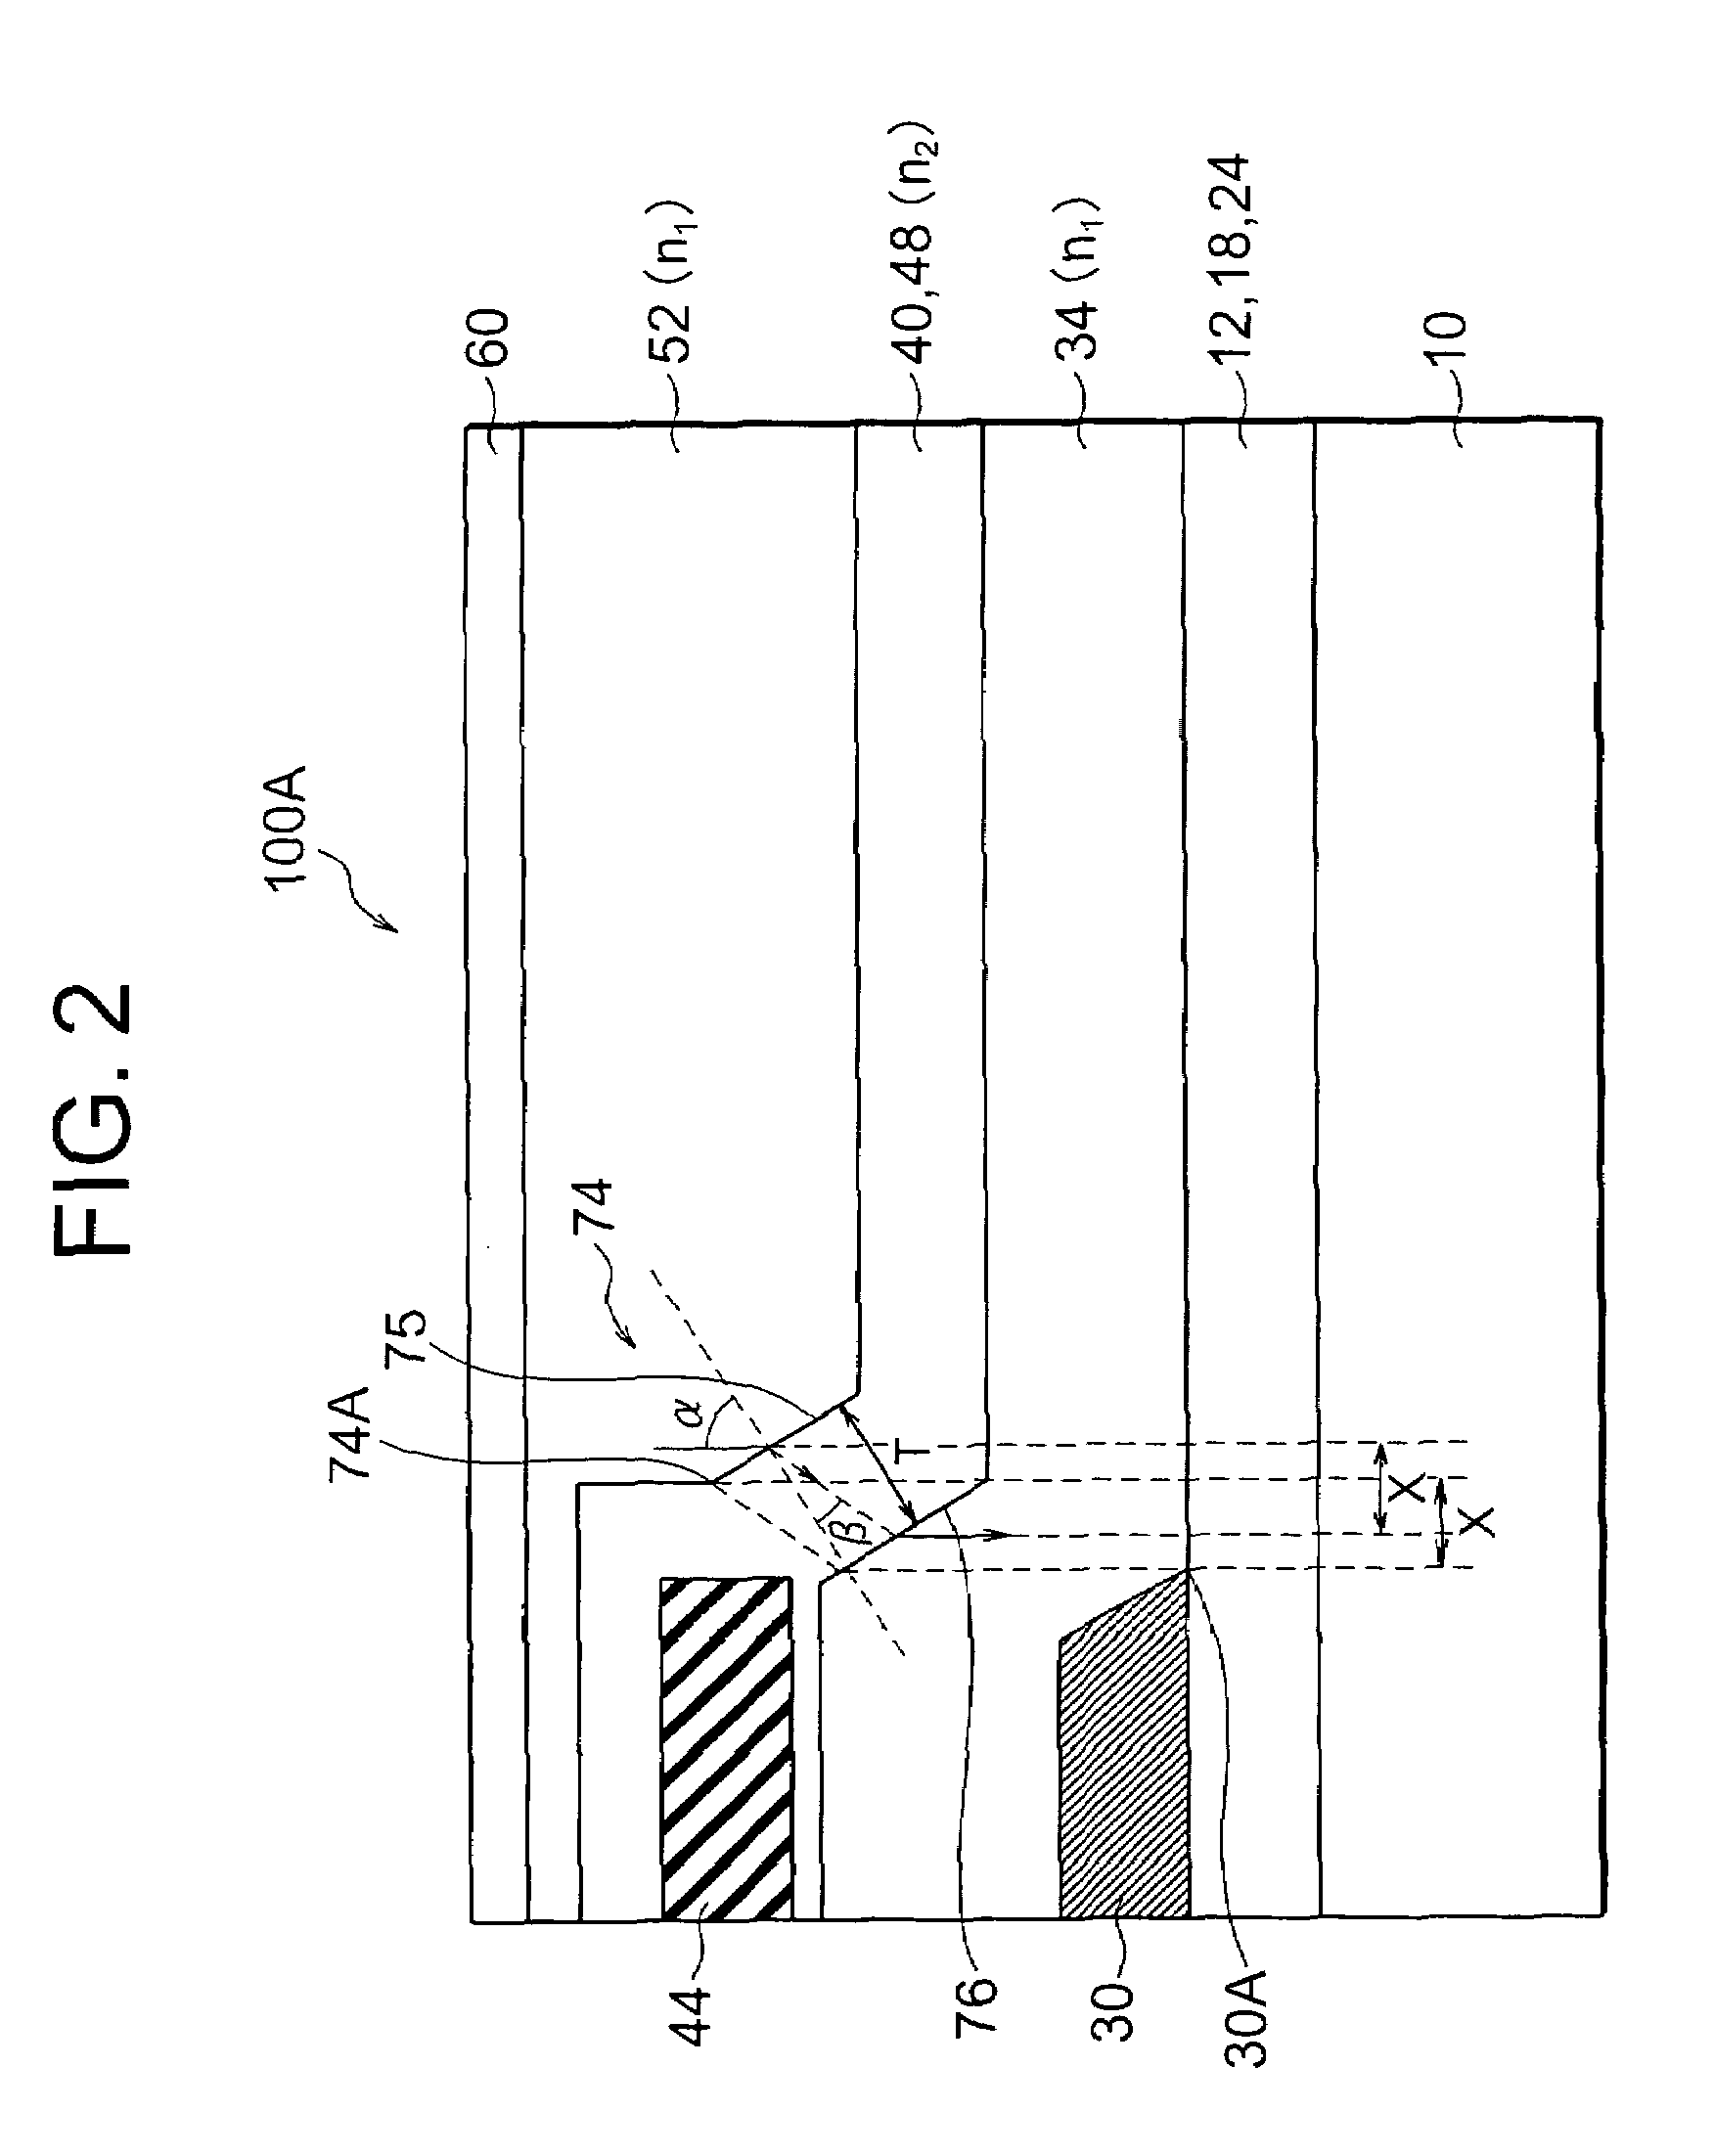 Electro-optical display device and image projection unit